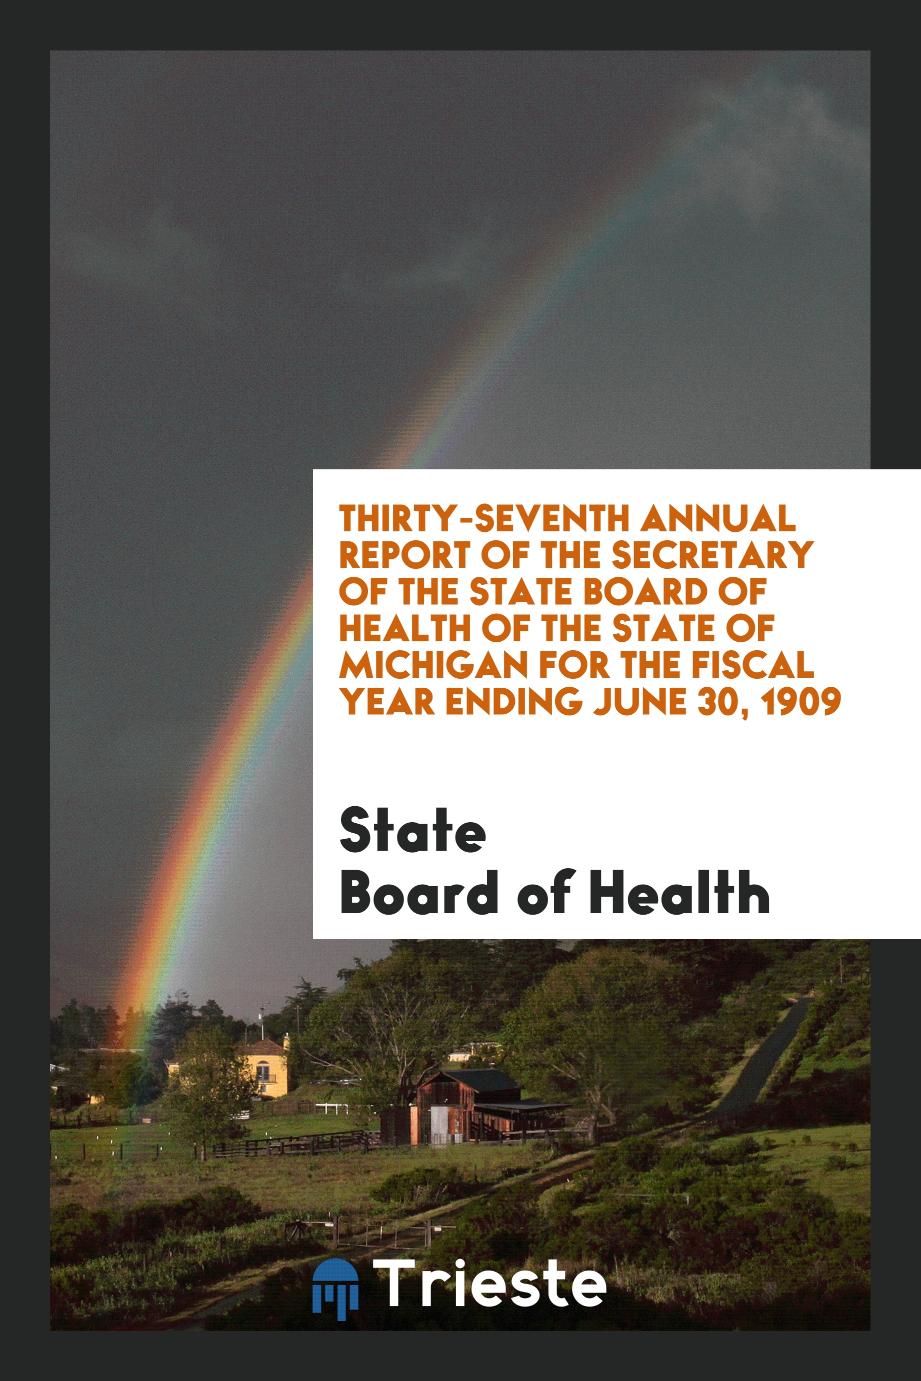 Thirty-Seventh Annual Report of the Secretary of the State Board of Health of the State of Michigan for the Fiscal Year Ending June 30, 1909